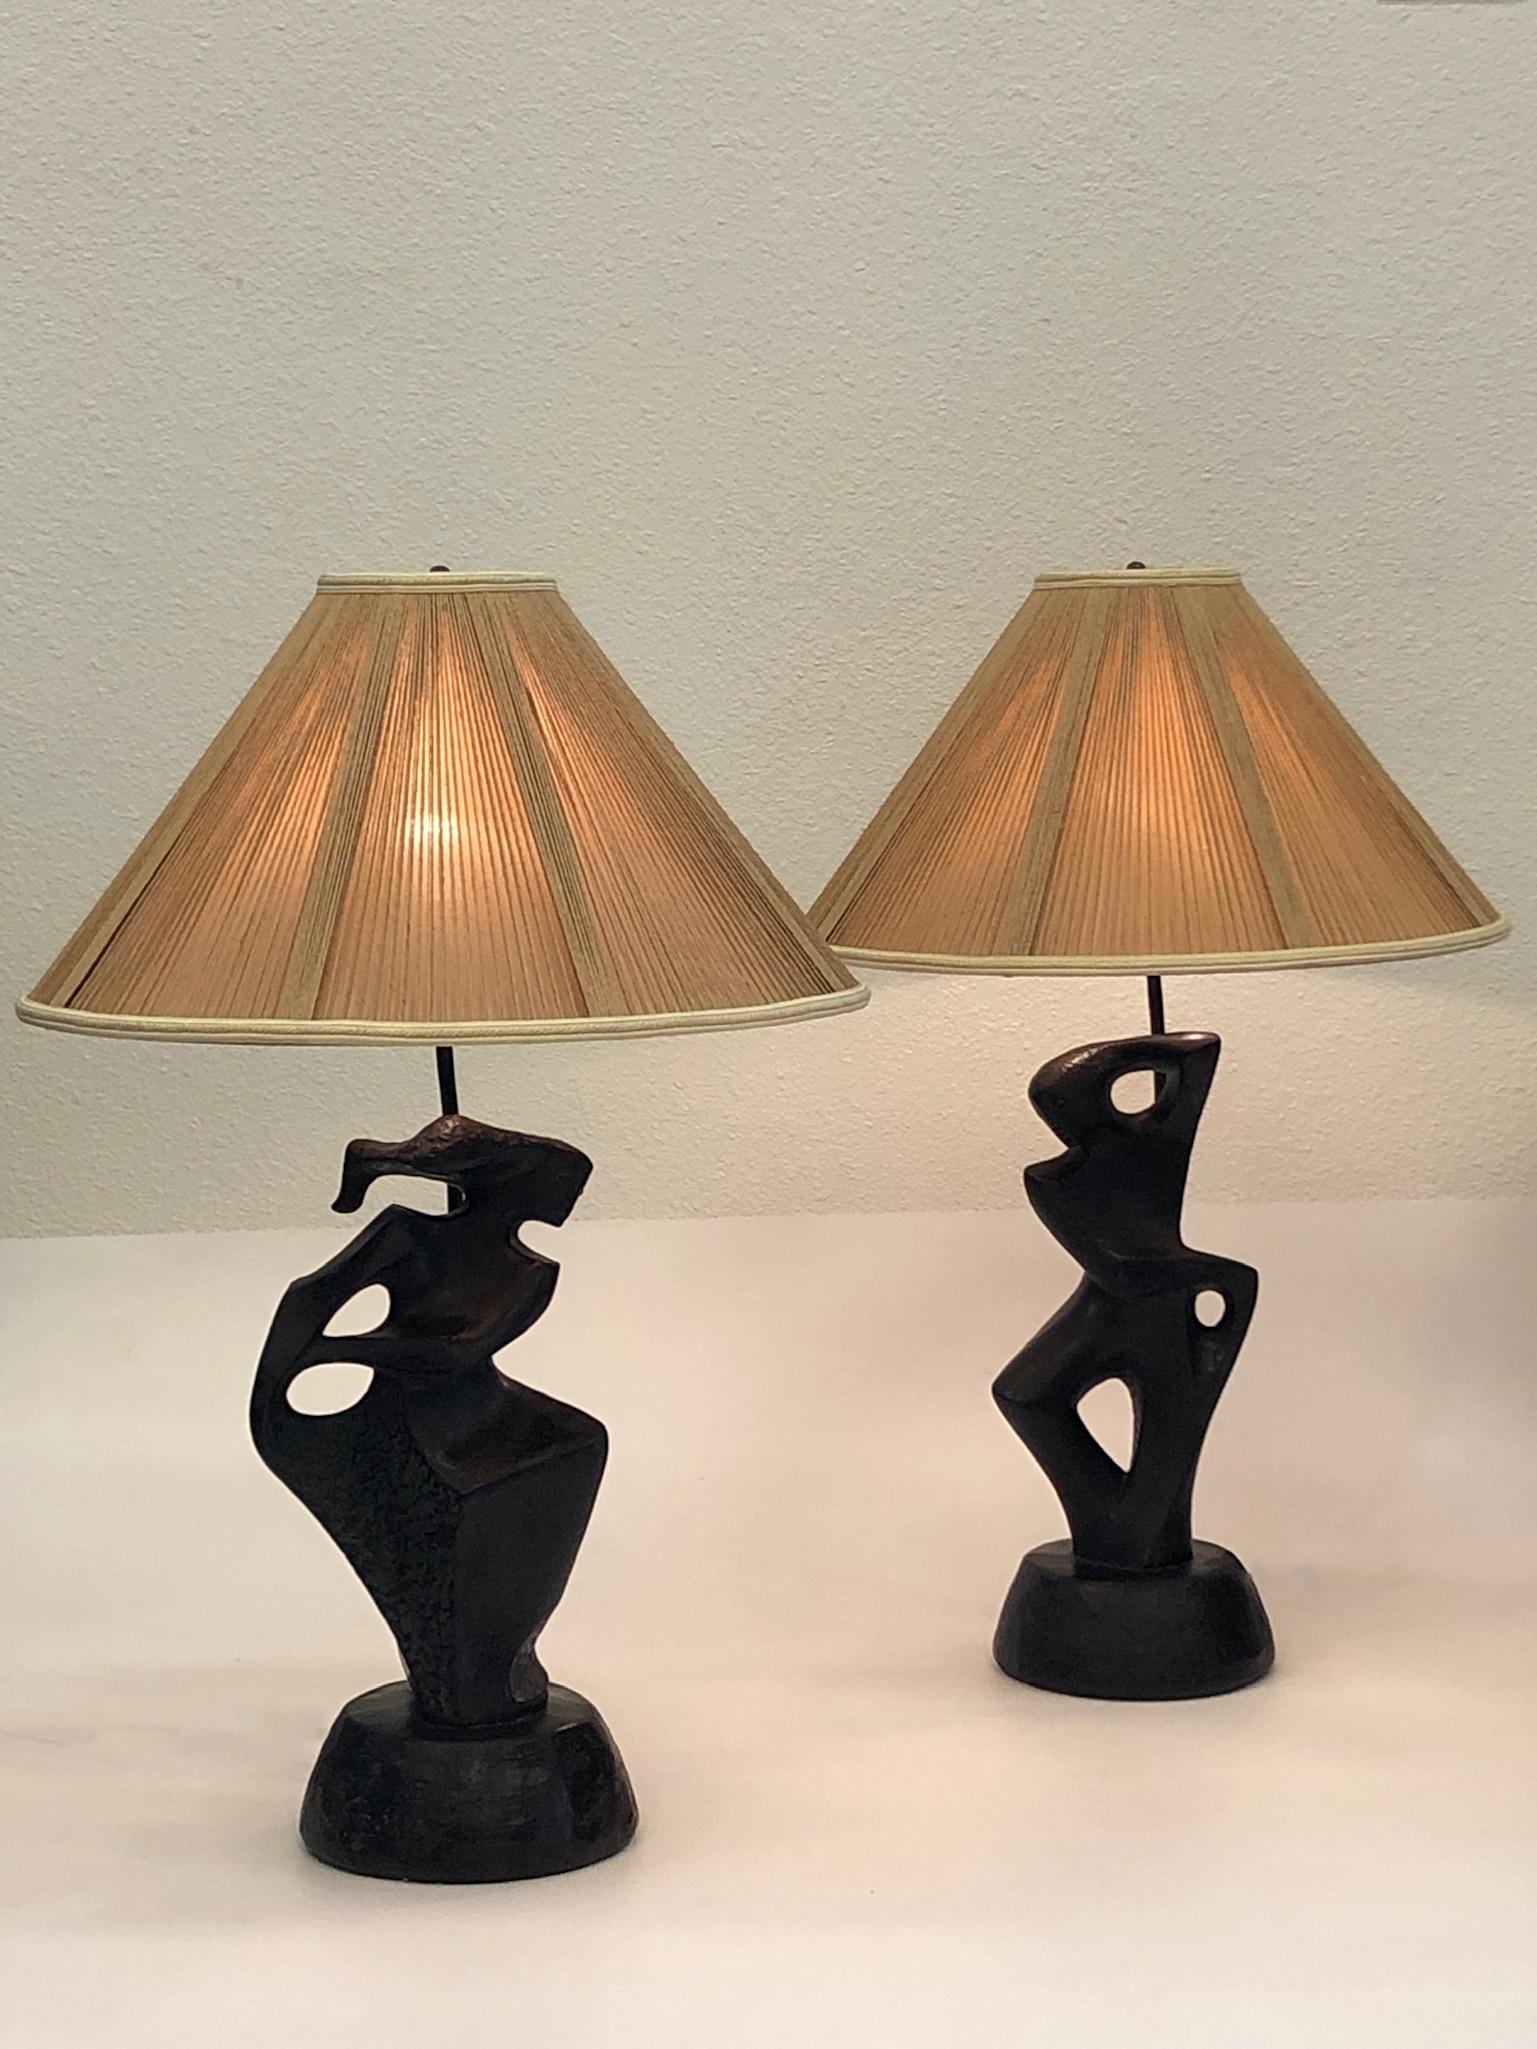 American Pair of Black Lacquered Sculptural Table Lamps by Marianna von Allesch for RIMA